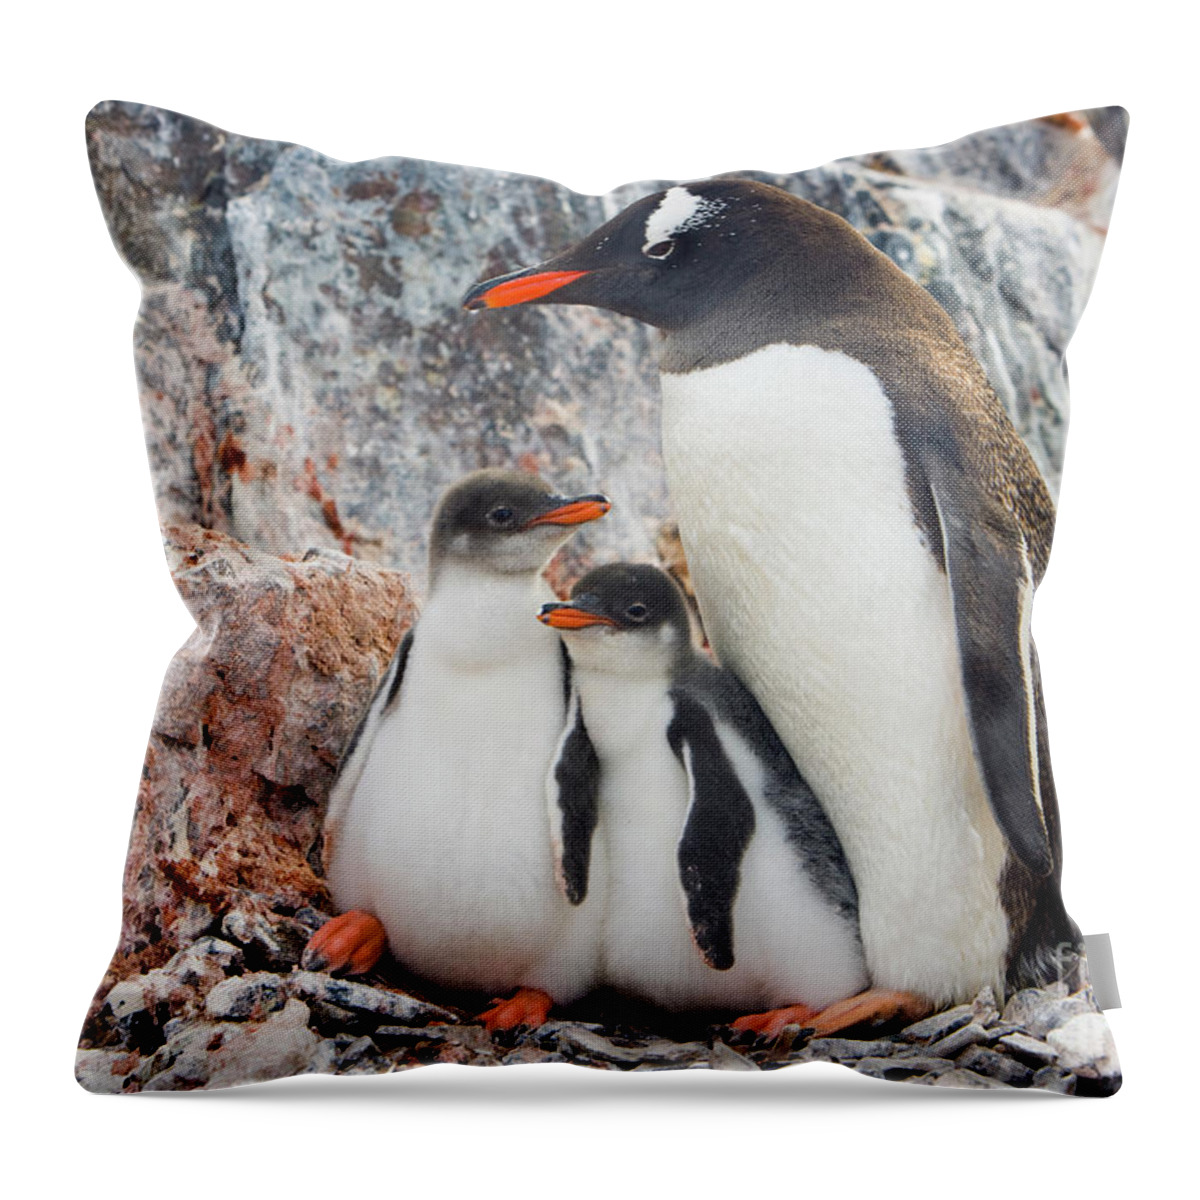 00345581 Throw Pillow featuring the photograph Gentoo Penguin Family on Booth Isl by Yva Momatiuk and John Eastcott